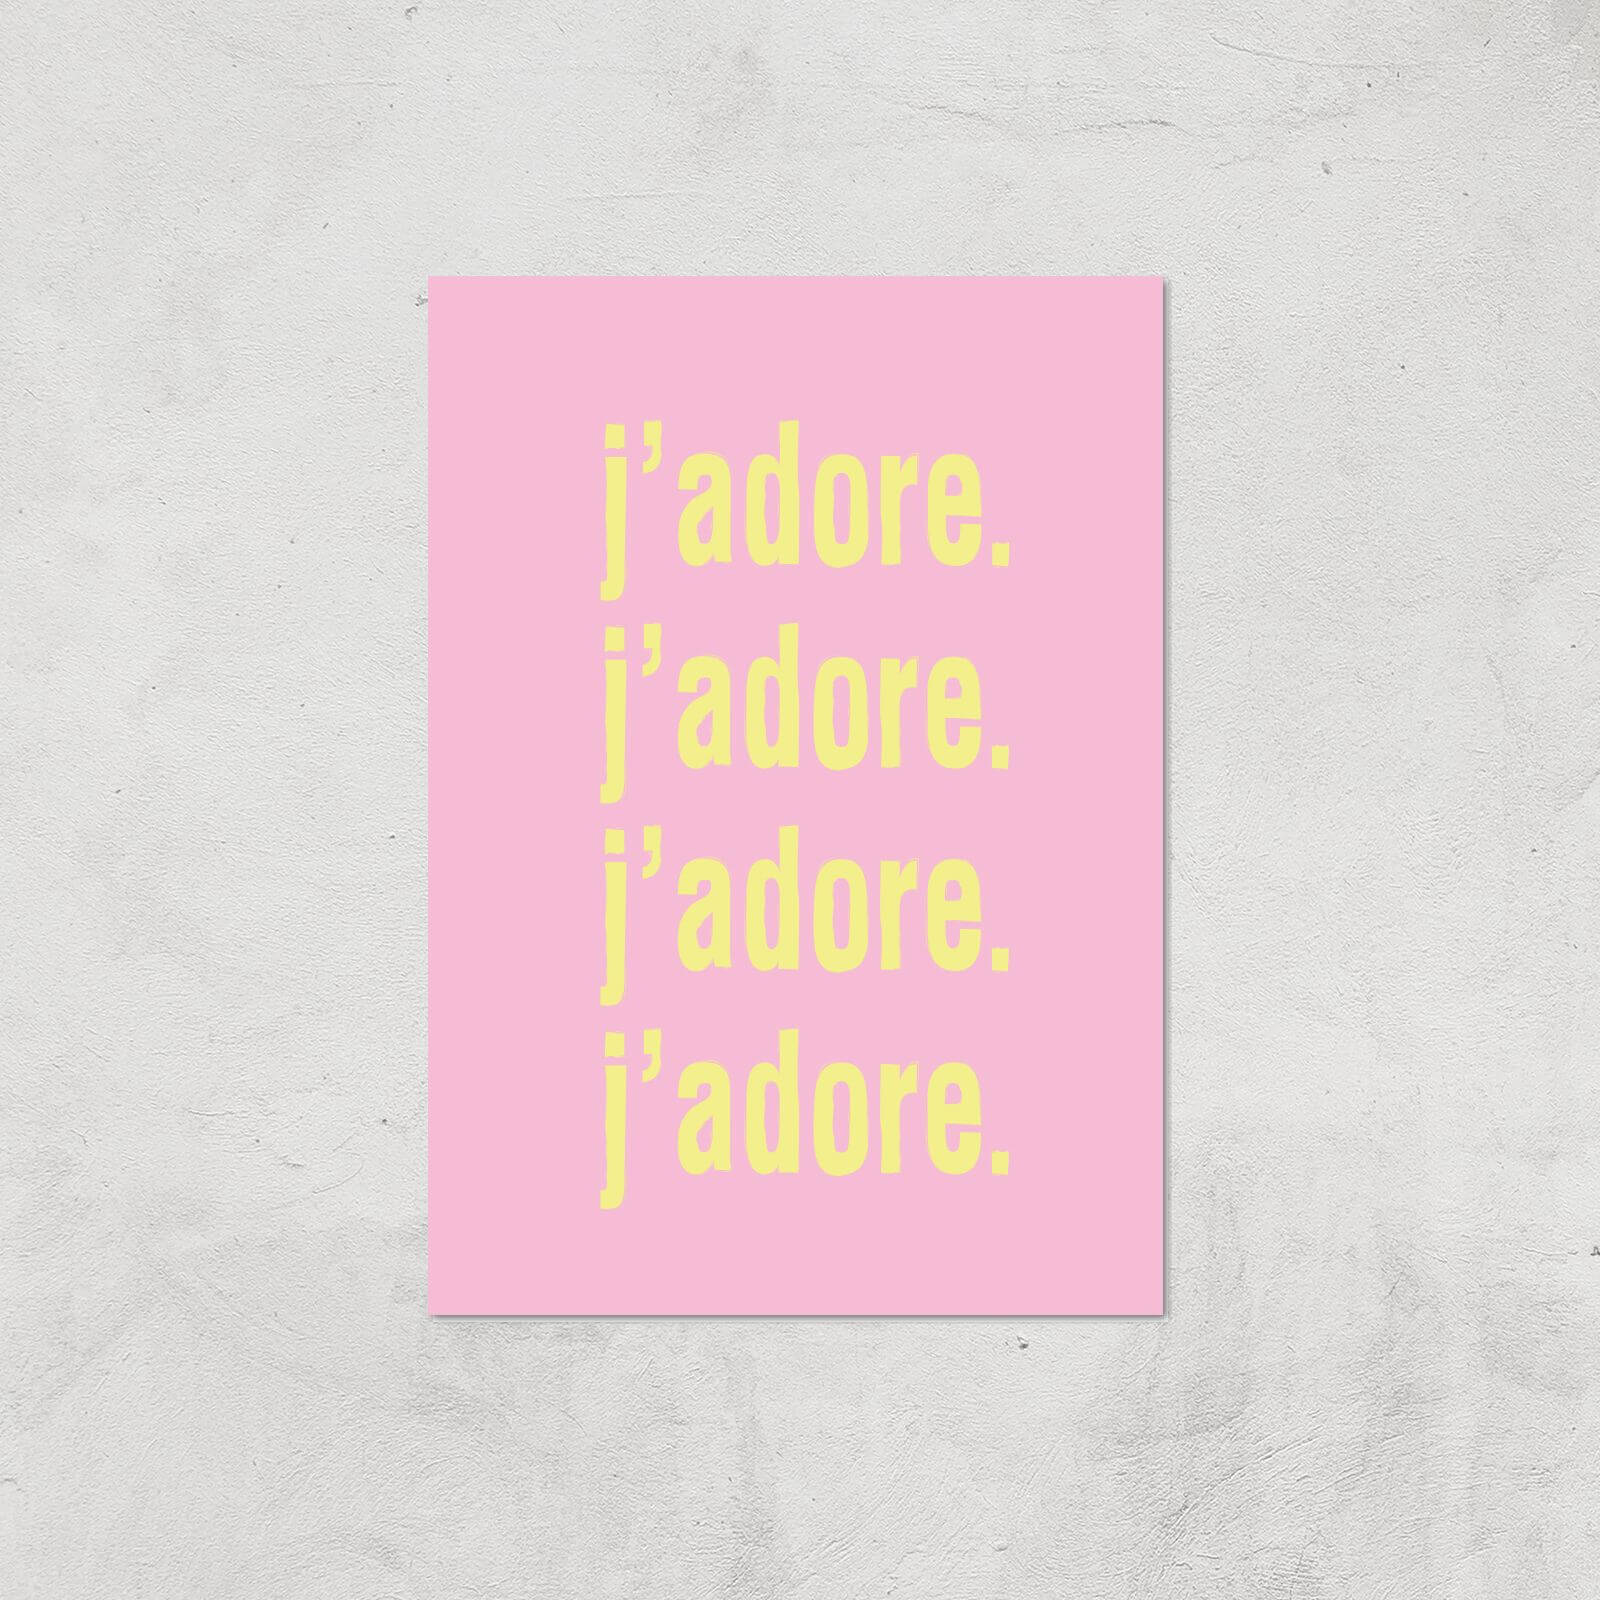 J'adore J'adore J'adore J'adore Giclee Art Print - A4 - Print Only